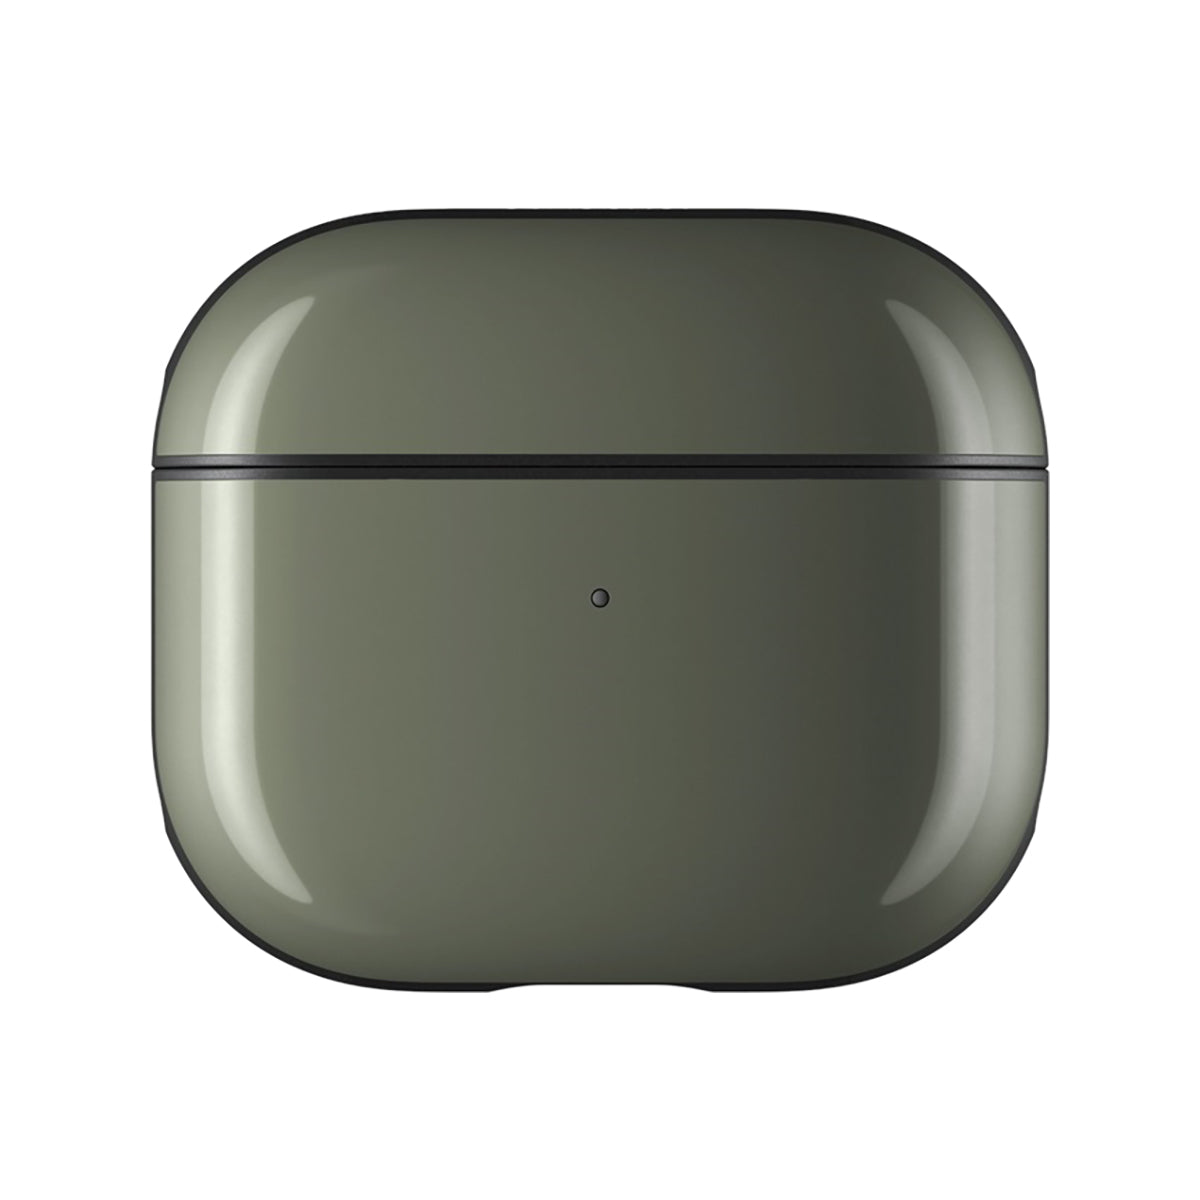 NOMAD Sport Case for AirPods 3rd Generation - Ash Green